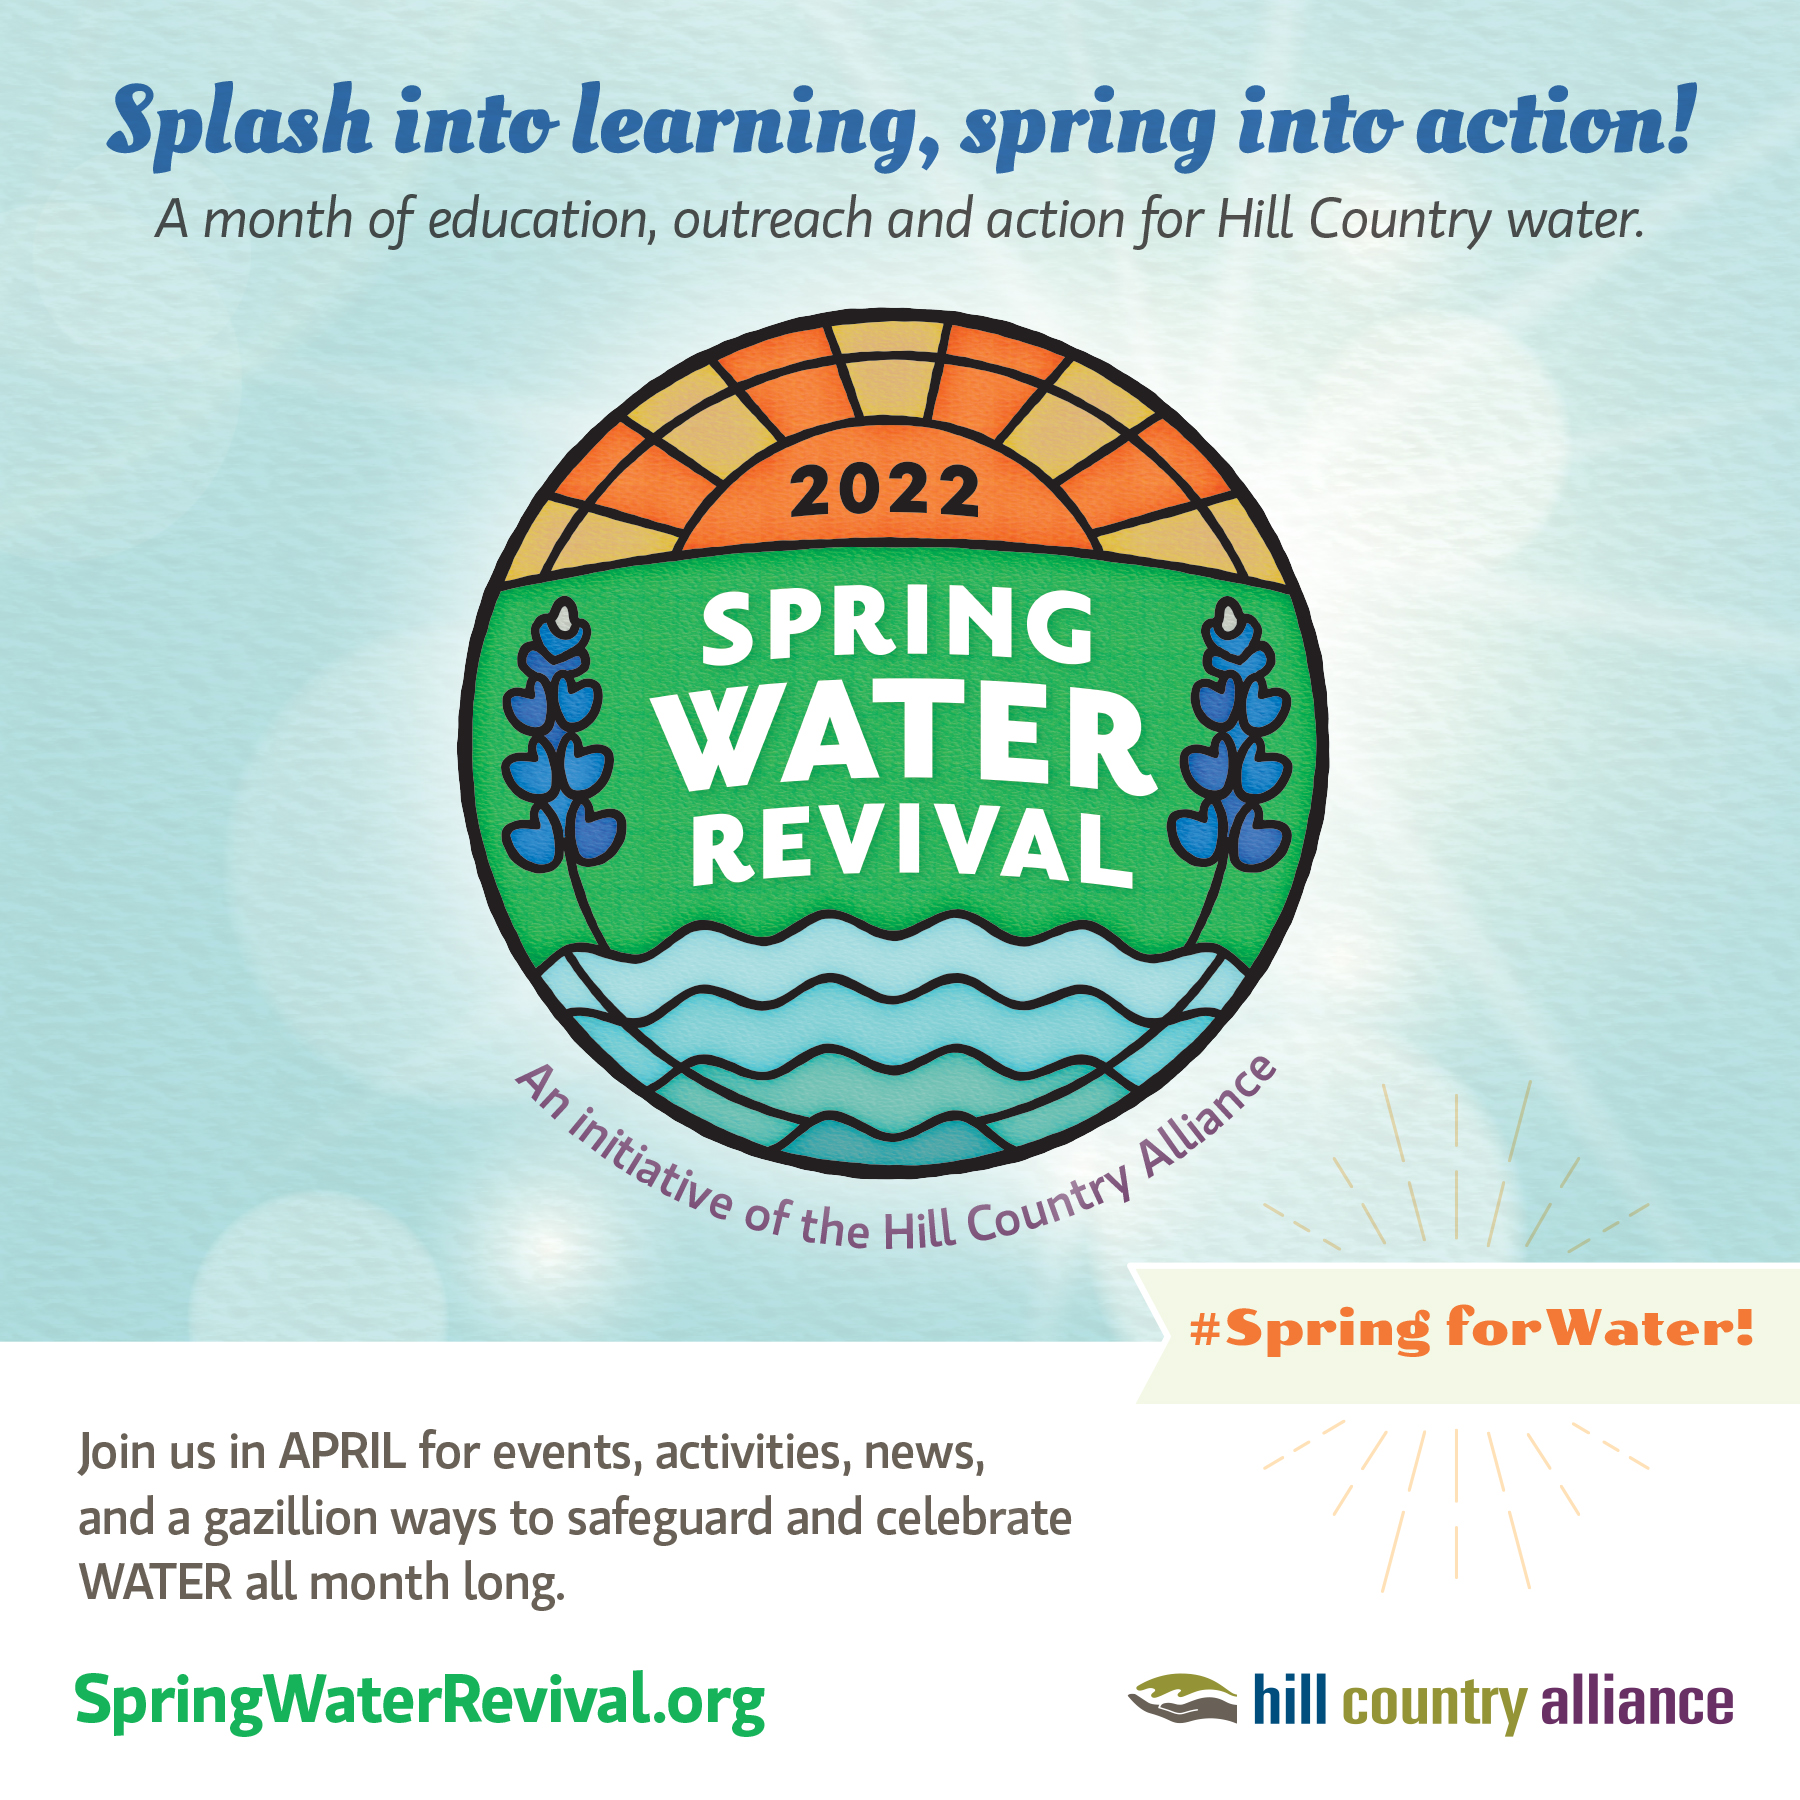 Splash into learning, spring into action. A month of education, outreach, and action for Hill Country Water.